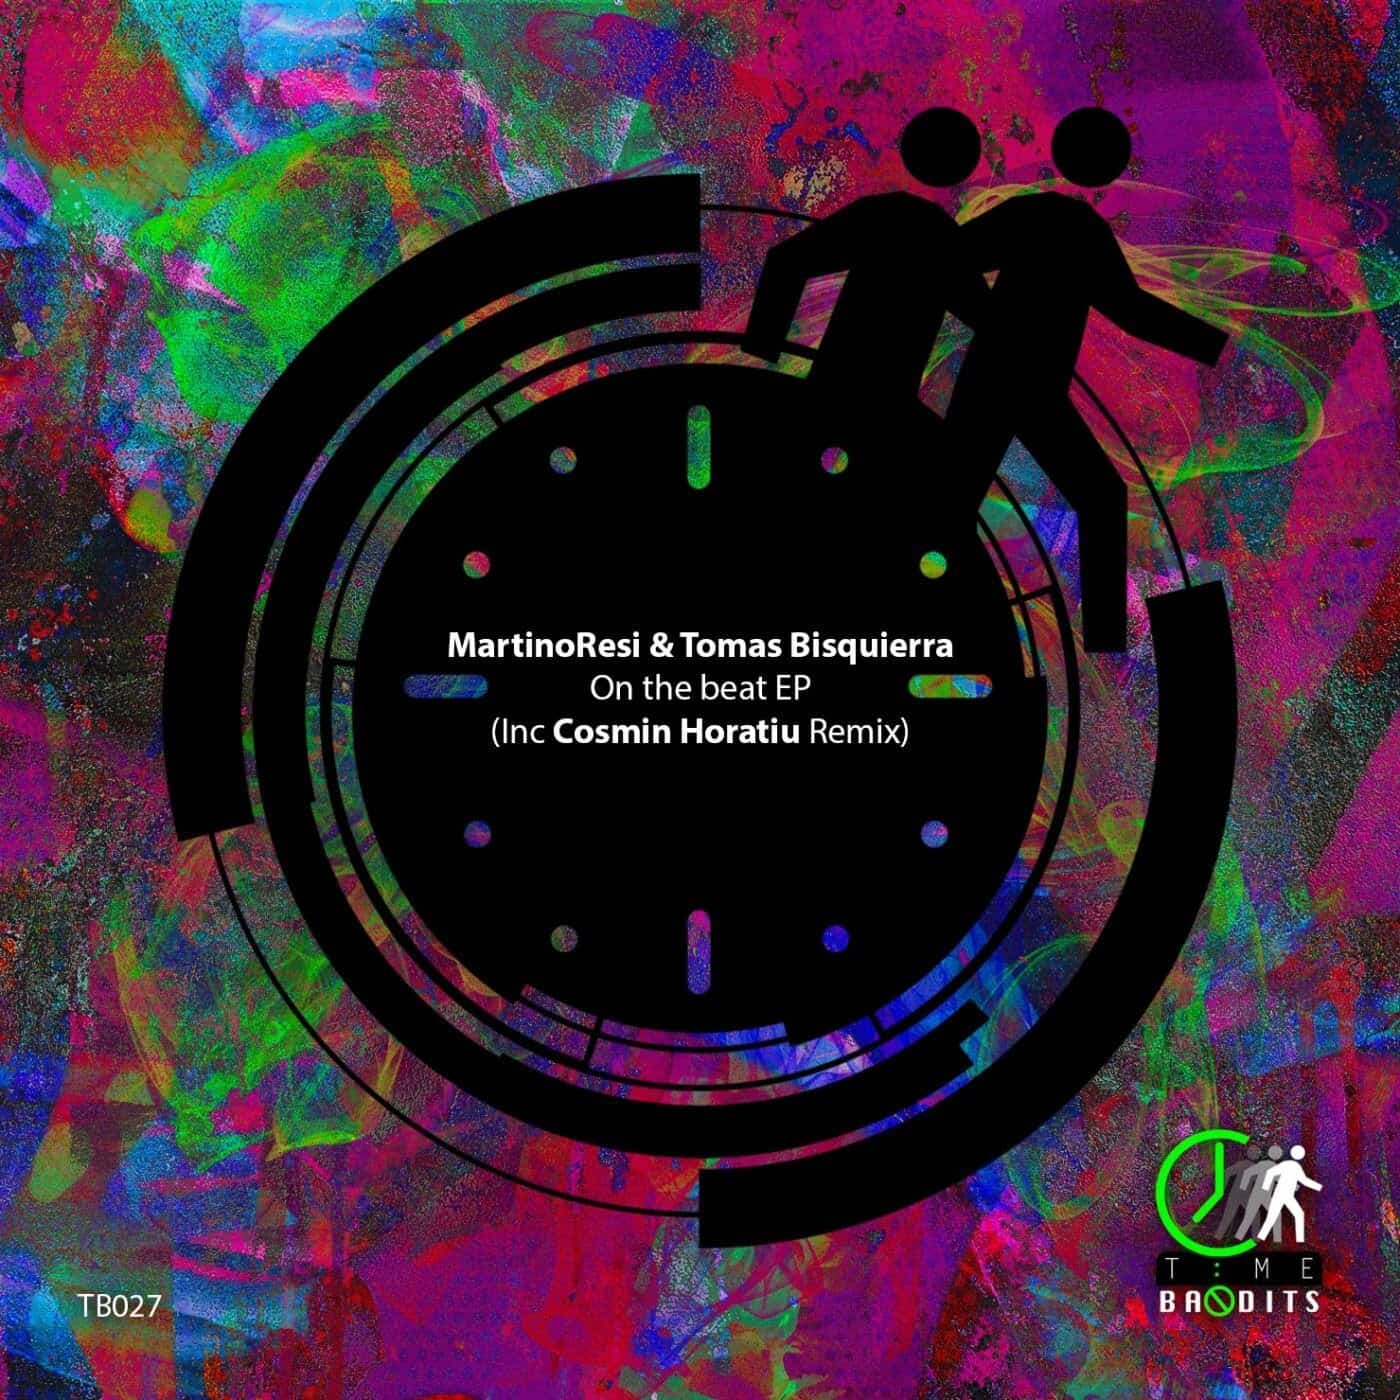 Download MartinoResi, Tomas Bisquierra - On The Beat on Electrobuzz